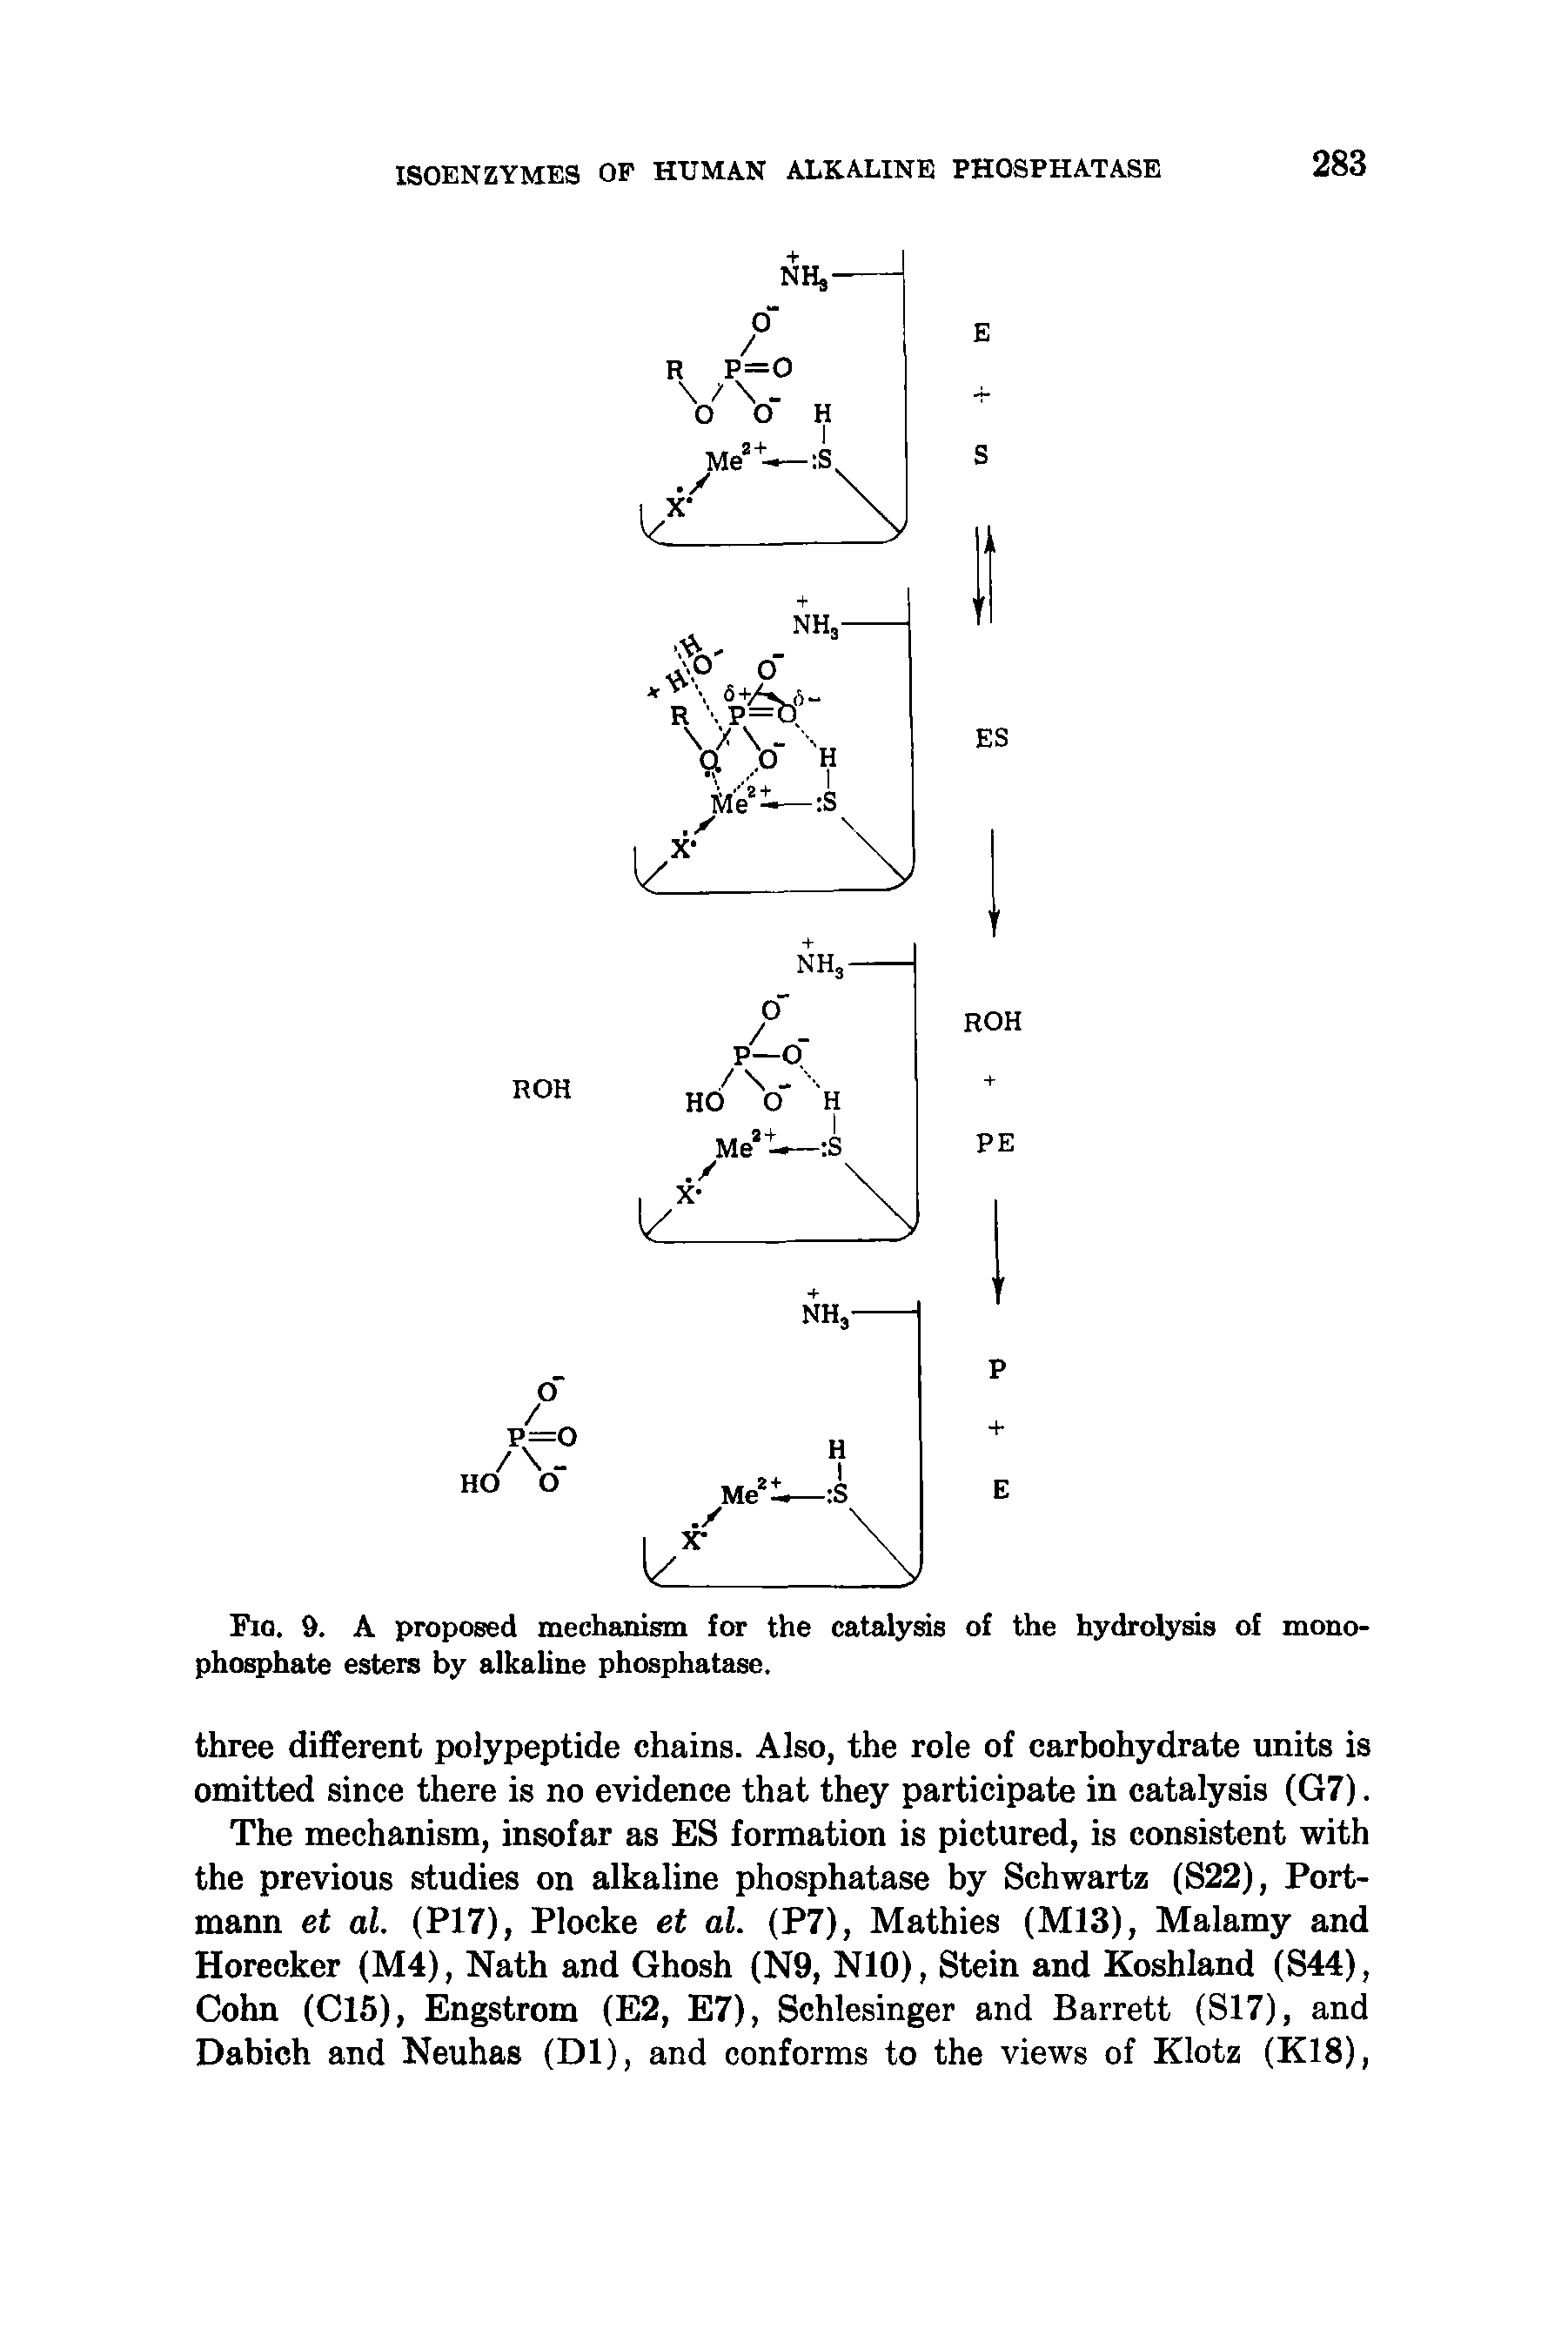 Fig. 9. A proposed mechanism for the catalyas of the hydrolysis of monophosphate esters by alkaline phosphatase.